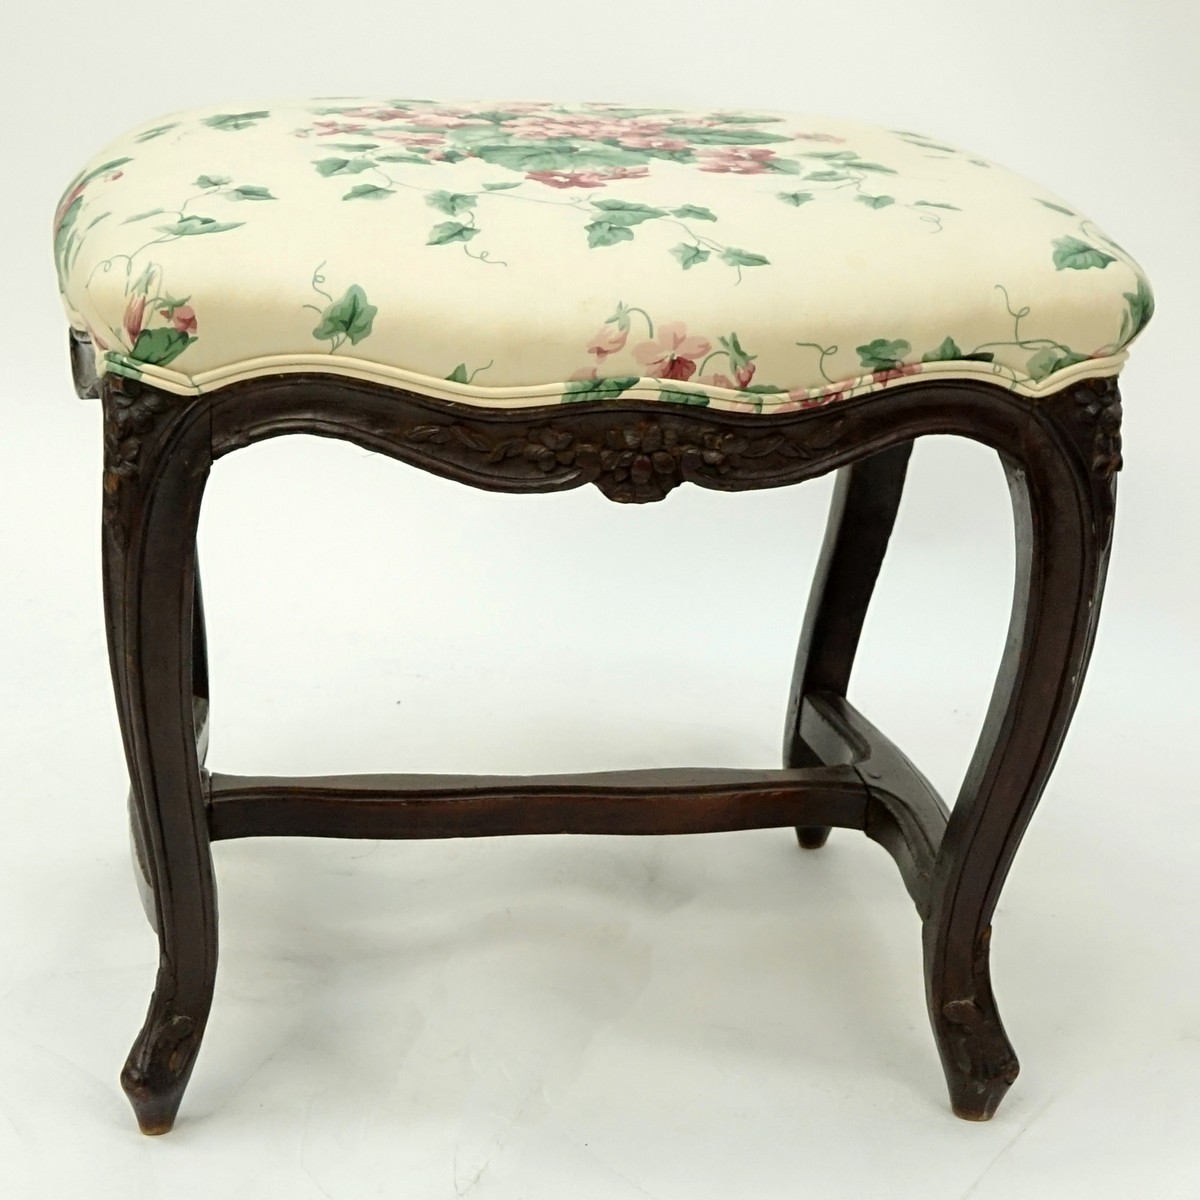 19th Century Louis XV French Carved Wood and Upholstered Tabouret Stool. Scratches to wood.